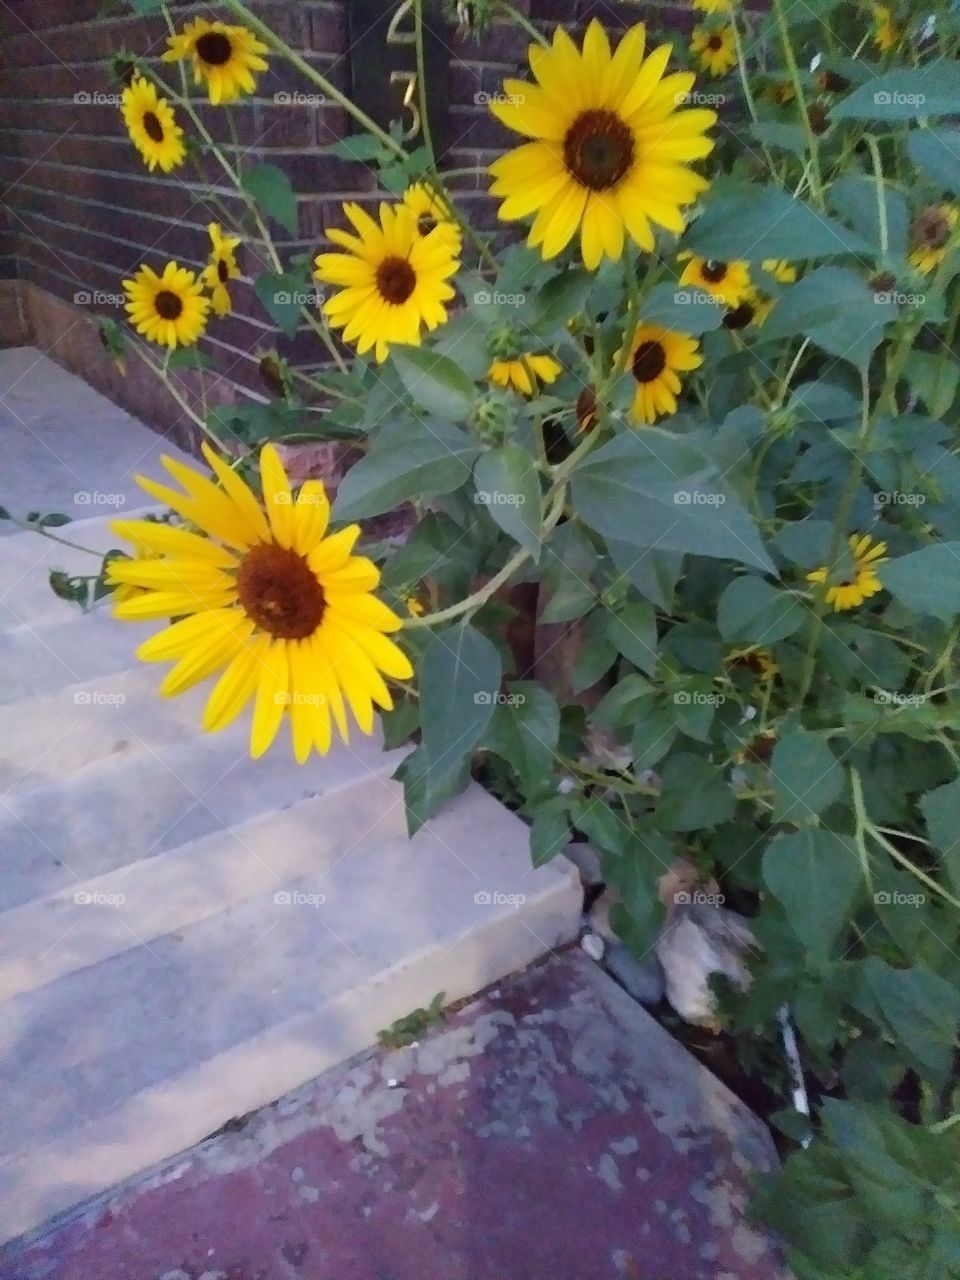 sunflowers will follow the sun through out the day